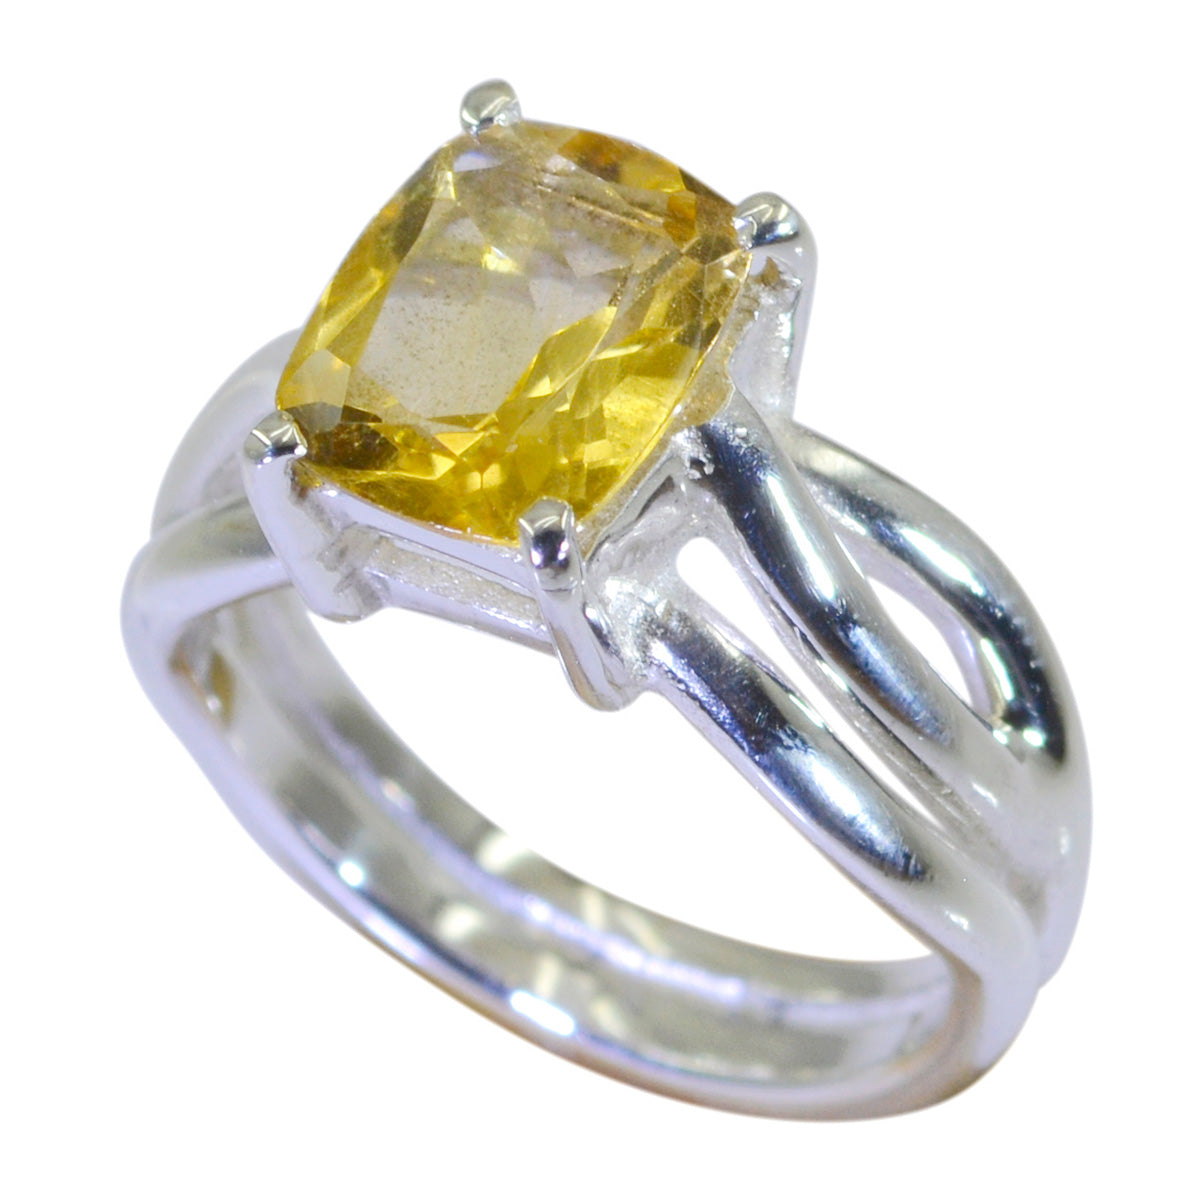 Glamorous Gems Citrine 925 Sterling Silver Rings Stainless Steel Jewelry